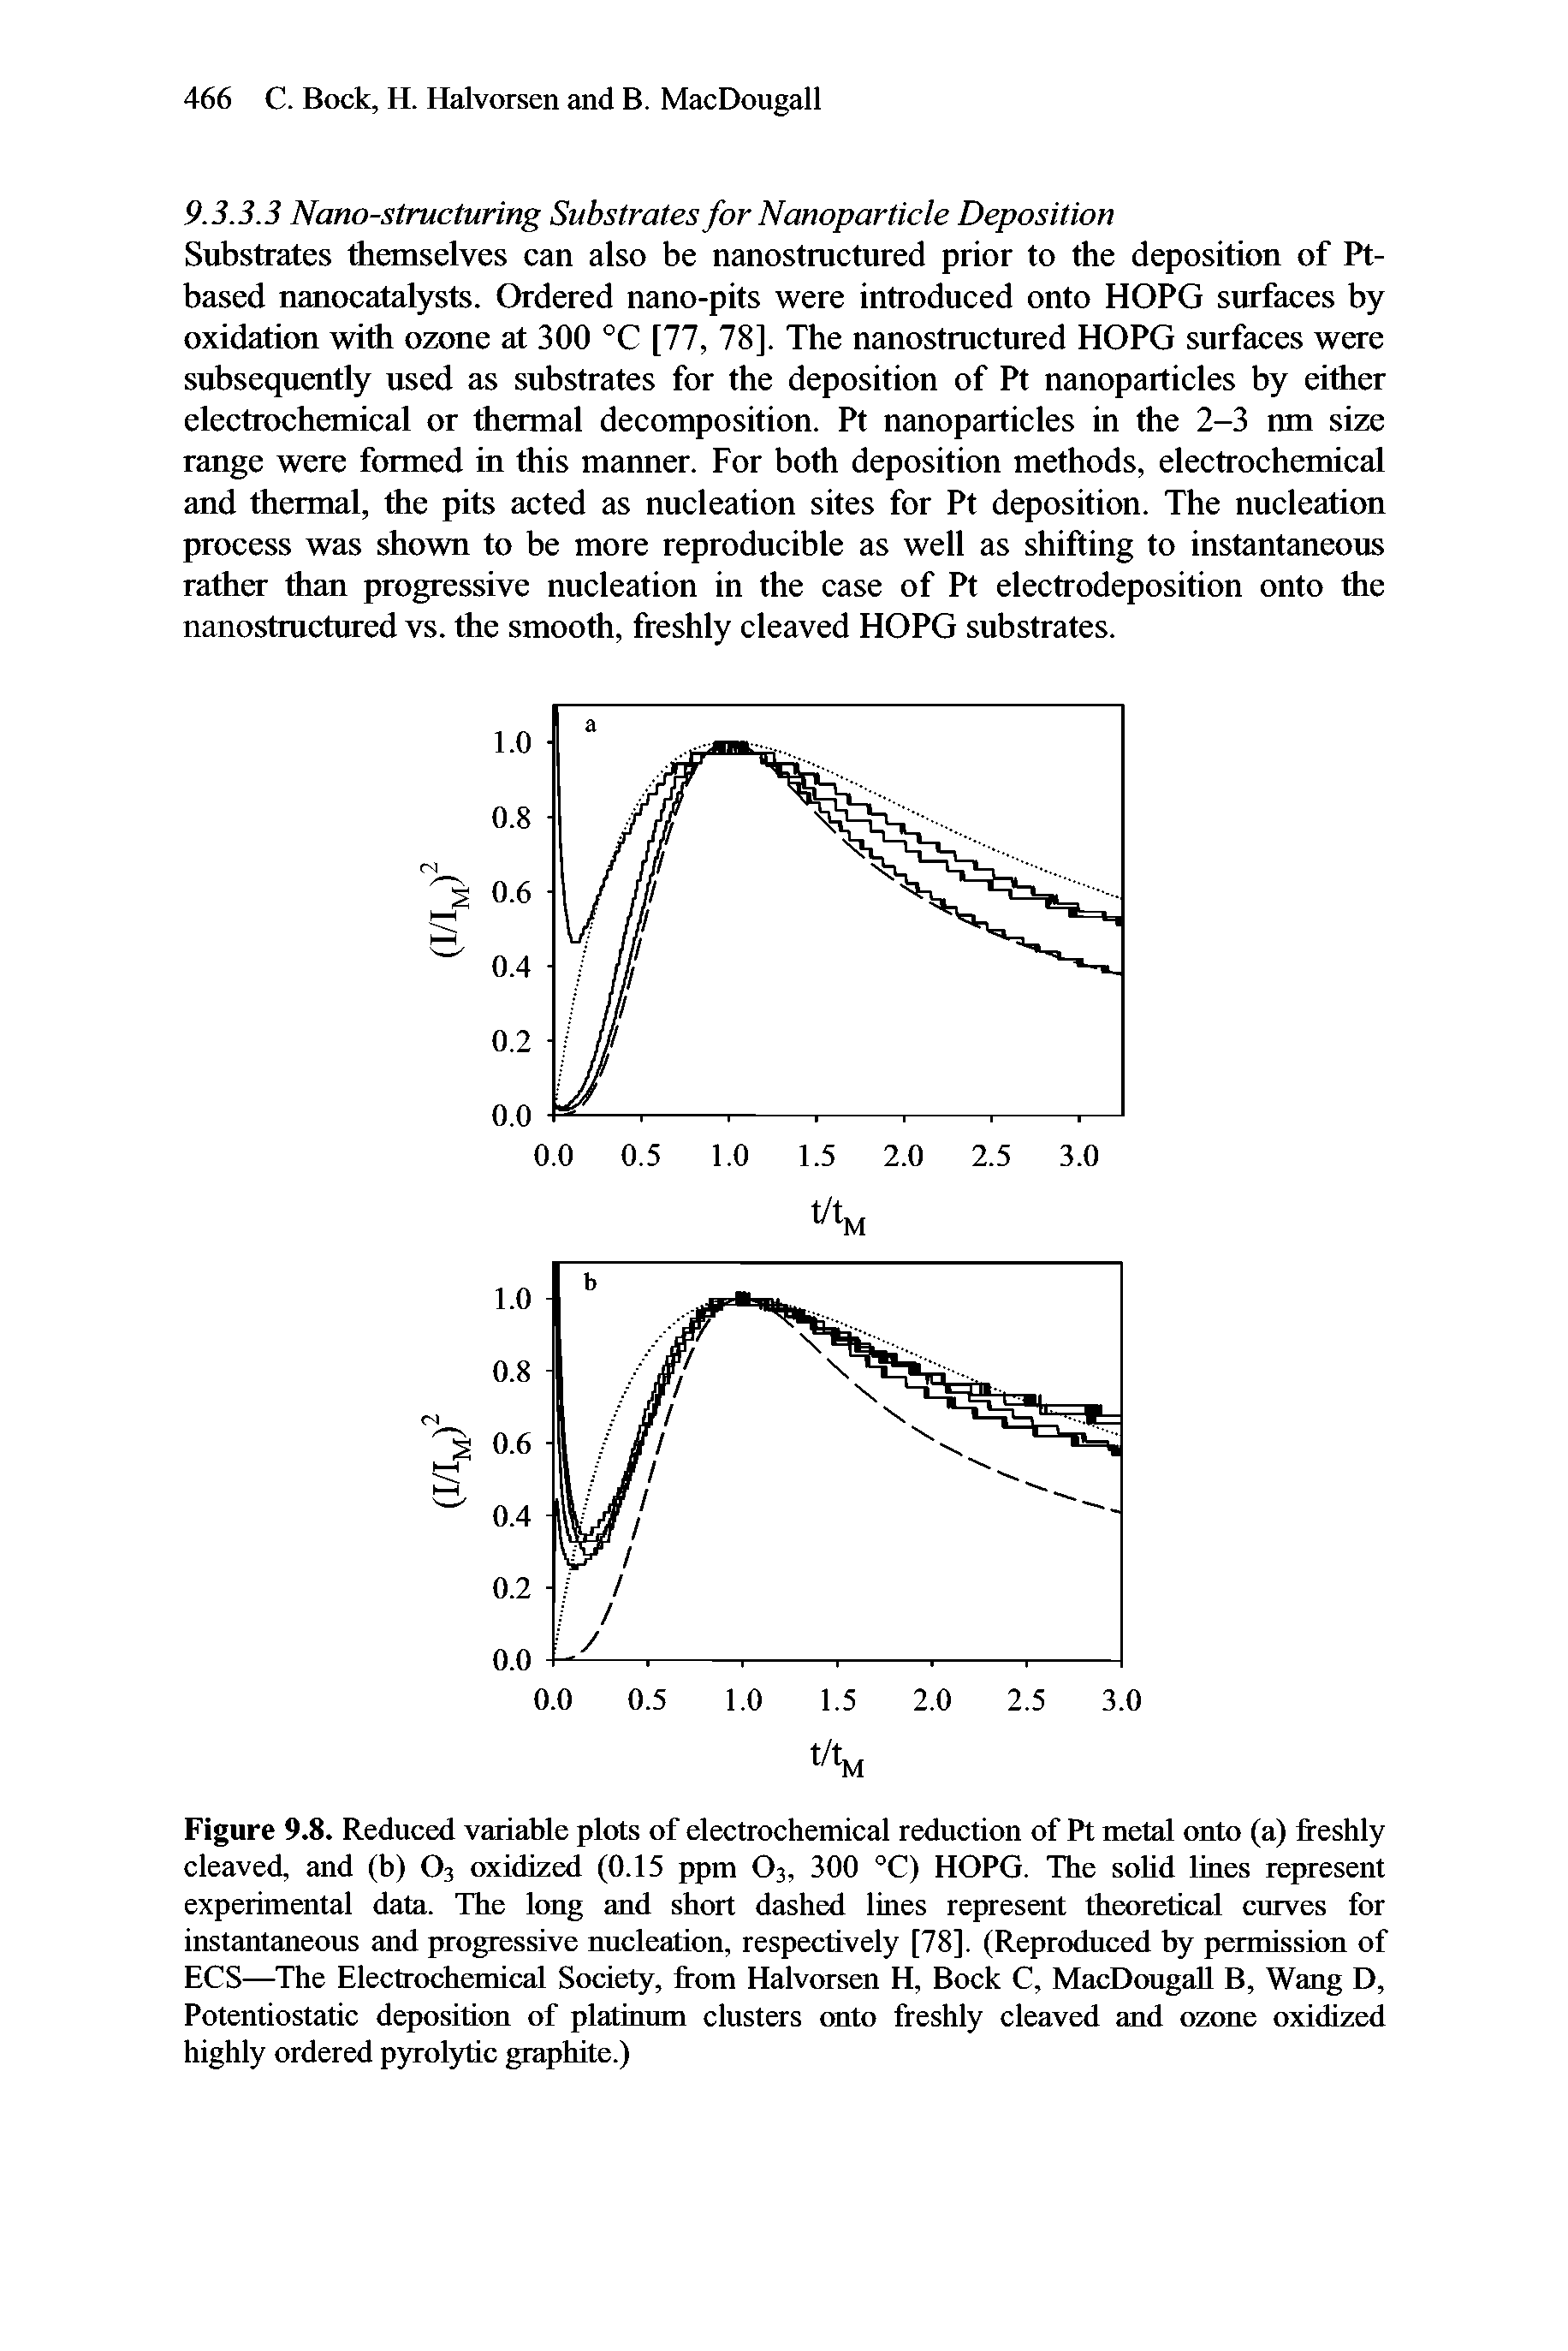 Figure 9.8. Reduced variable plots of electrochemical reduction of Pt metal onto (a) freshly cleaved, and (b) O3 oxidized (0.15 ppm O3, 300 °C) HOPG. The solid lines represent experimental data. The long and short dashed lines represent theoretical curves for instantaneous and progressive nucleation, respectively [78], (Reproduced by permission of ECS—The Electrochemical Society, from Halvorsen H, Bock C, MacDougall B, Wang D, Potentiostatic deposition of platinum clusters onto freshly cleaved and ozone oxidized highly ordered pyrol5dic graphite.)...